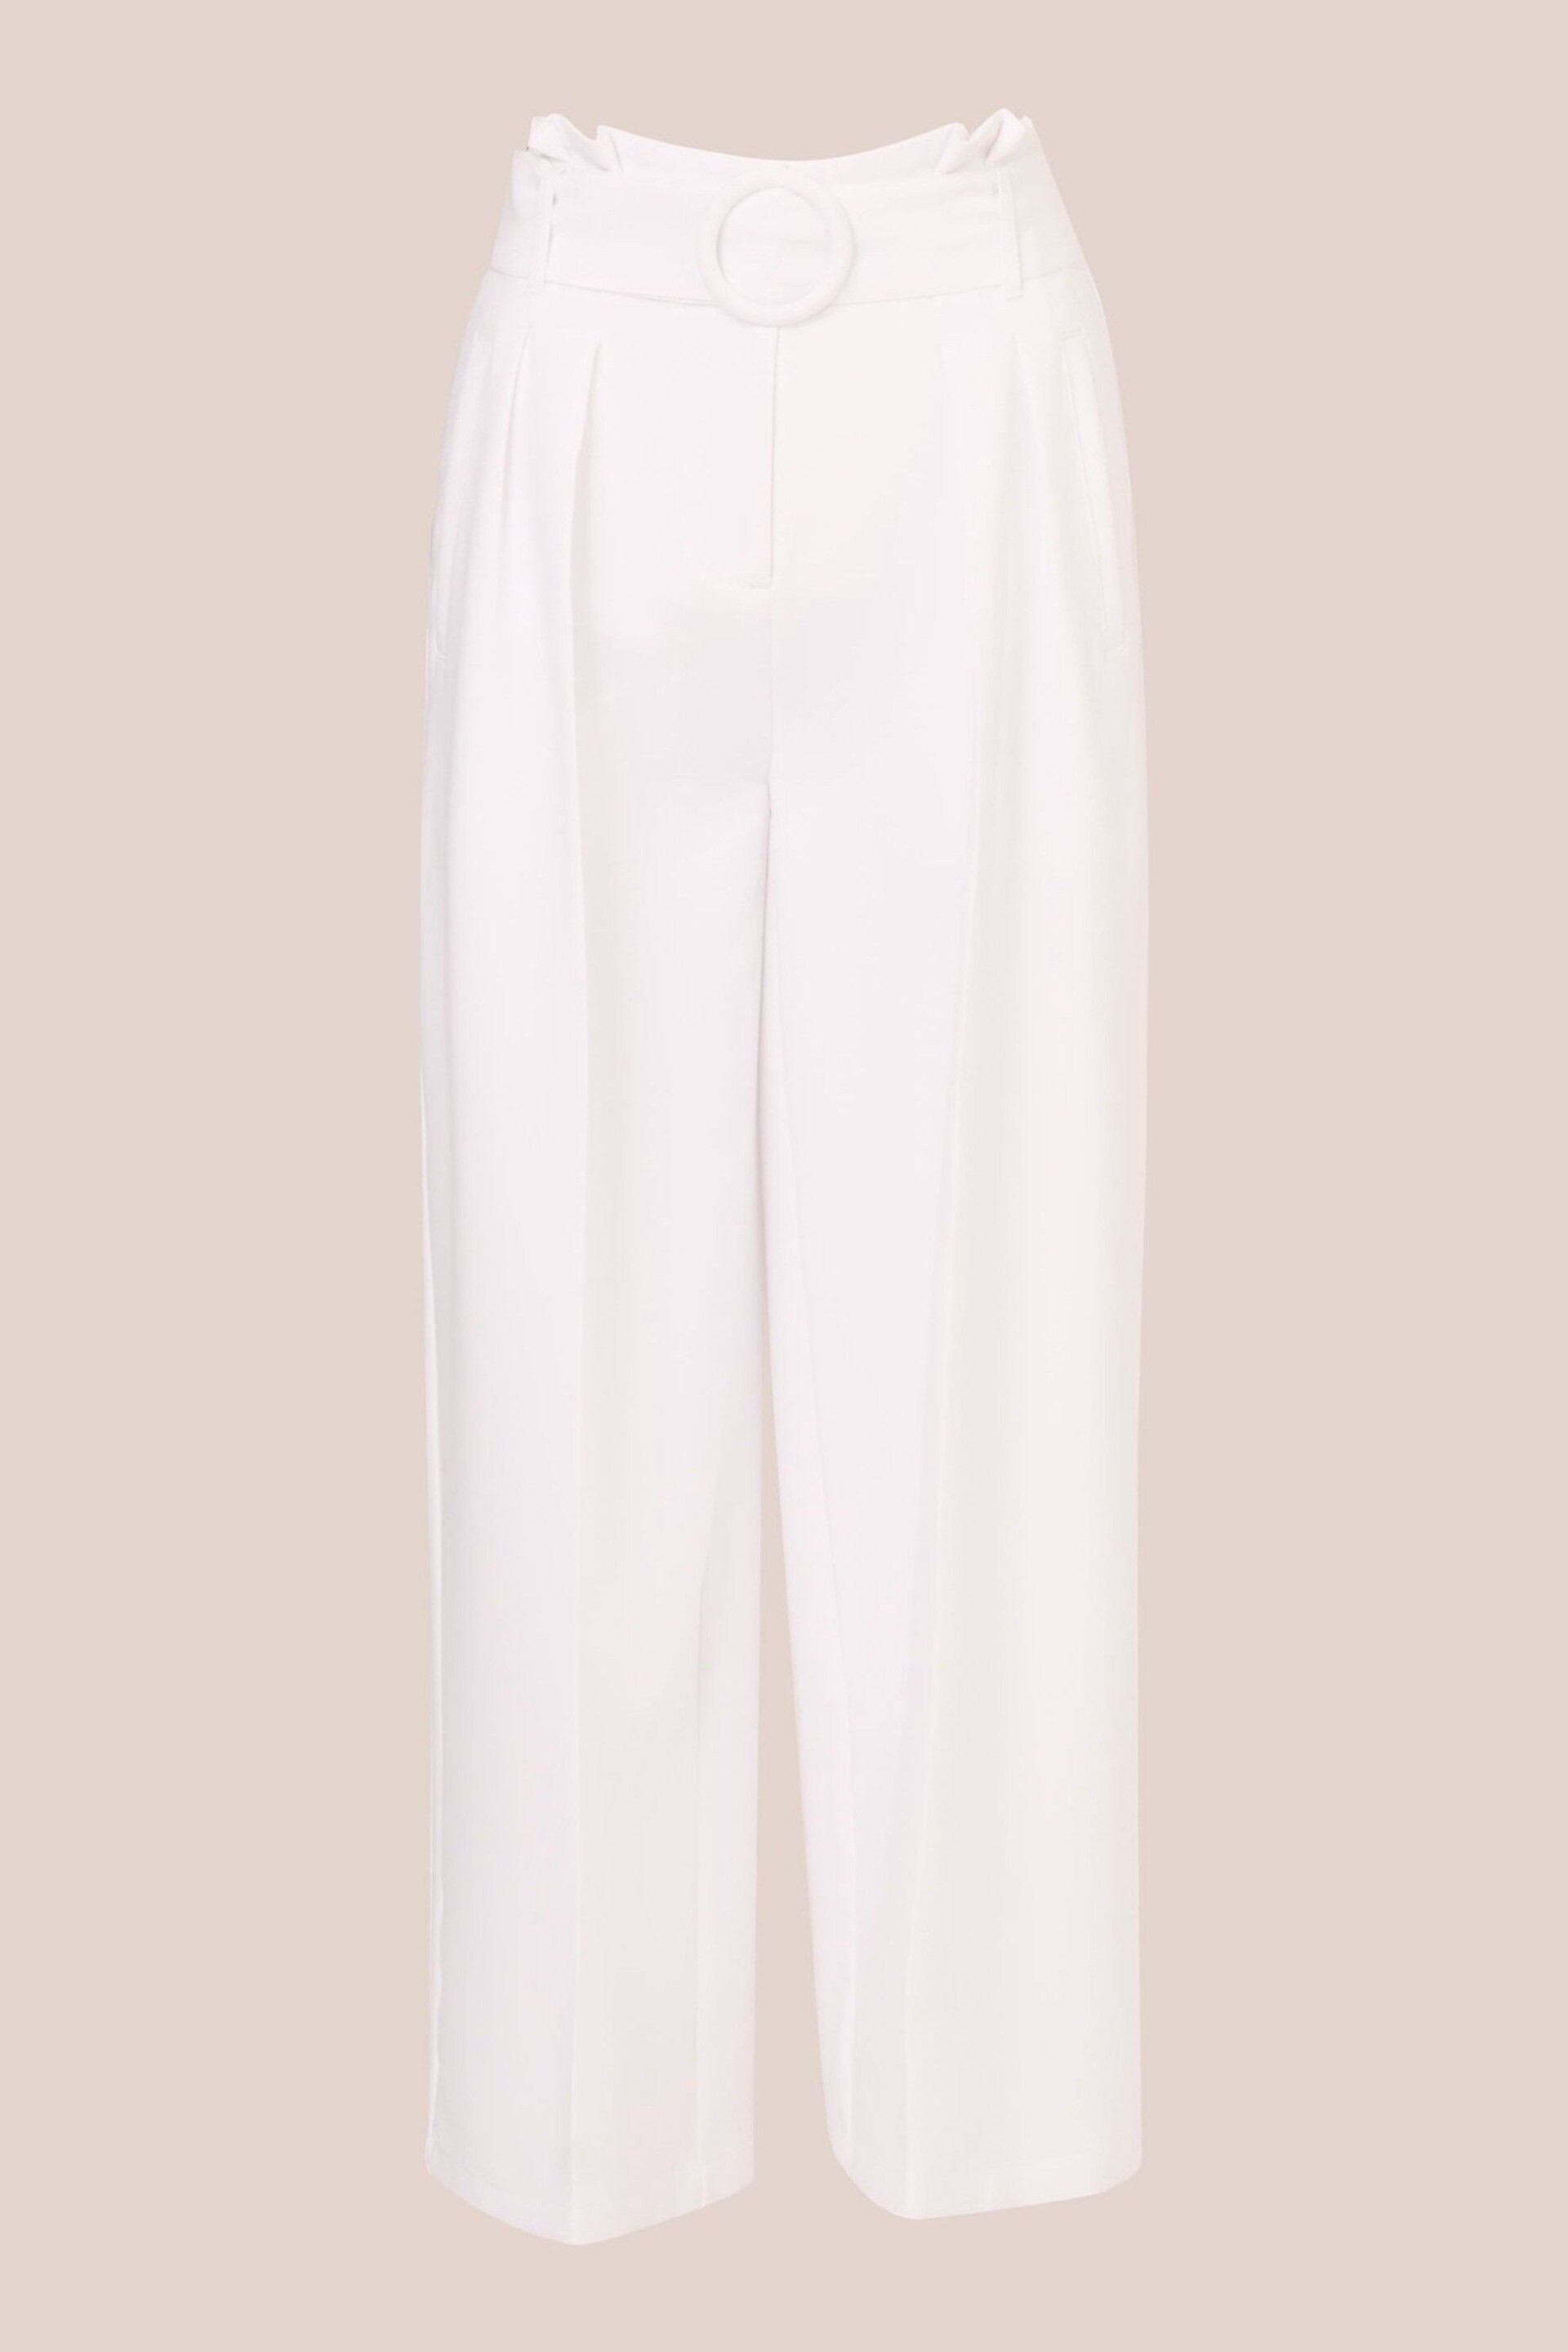 Adrianna Papell Solid Woven White Trousers With Belt - Image 6 of 7